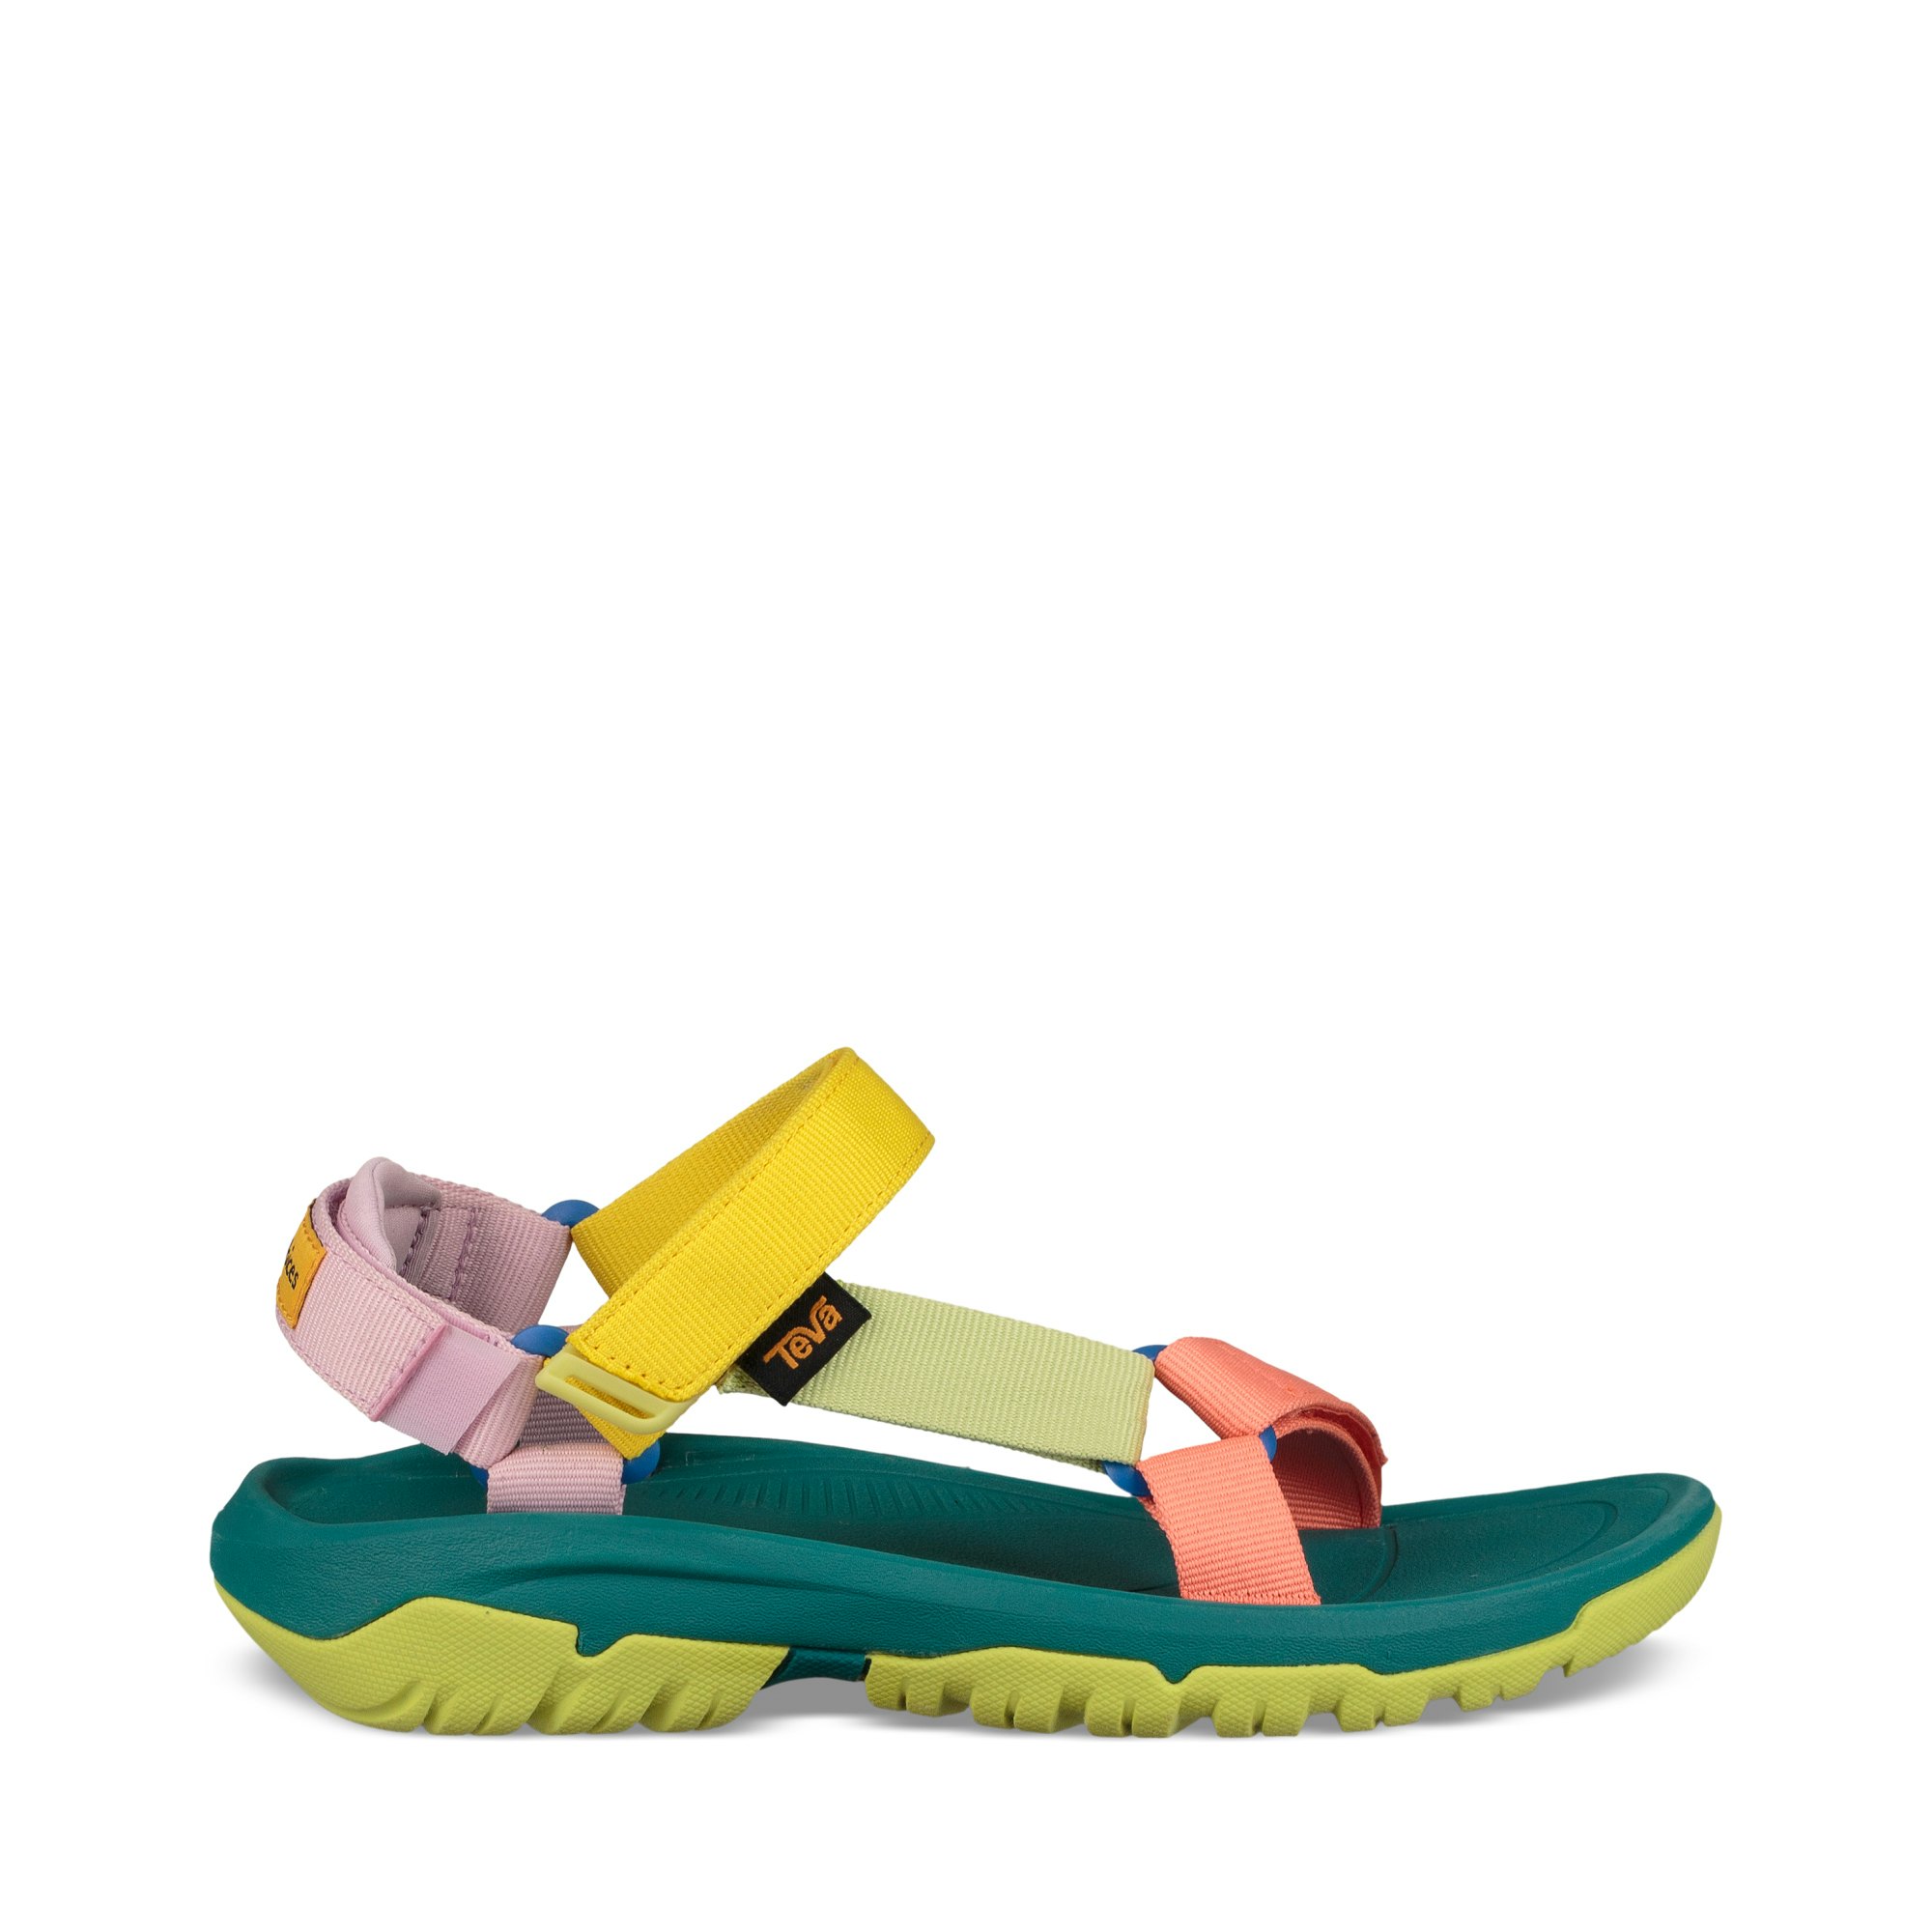 The Outdoor Voices x Teva Sandal Is 